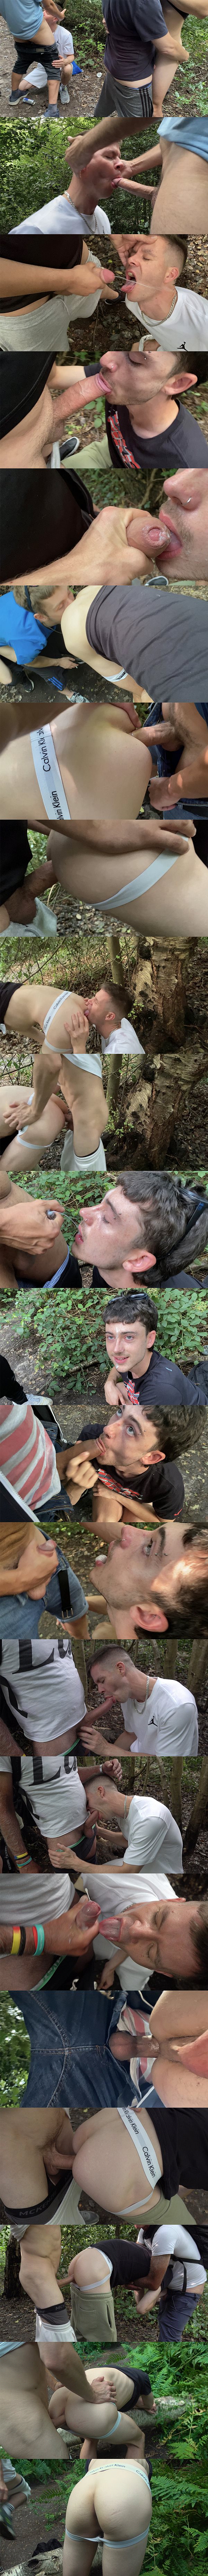 Josh, Hung Young Brit and two strangers bareback British twink Jake outdoors until Jake takes several loads in the mouth and ass in 3 Boozed-Up Young and Sleazy Lads Fuck Strangers at Hungyoungbrit 01